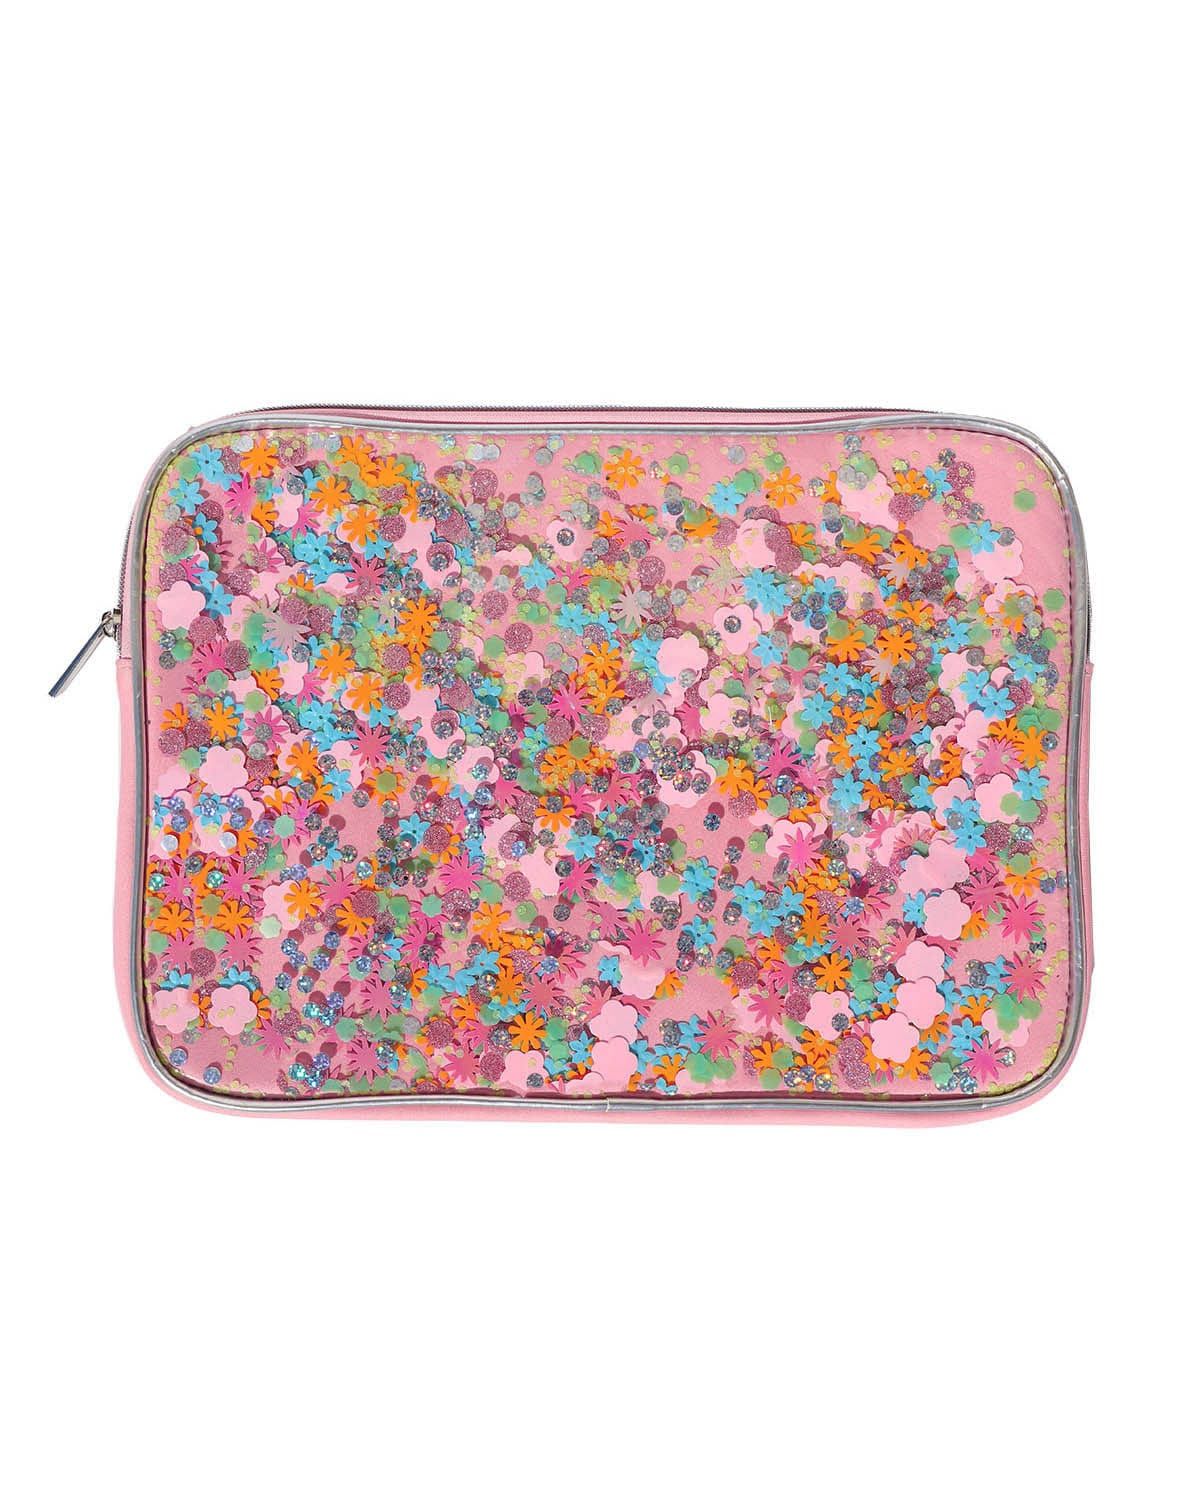 Flower Shop Confetti Laptop Sleeve and Carrying Case | Packed Party